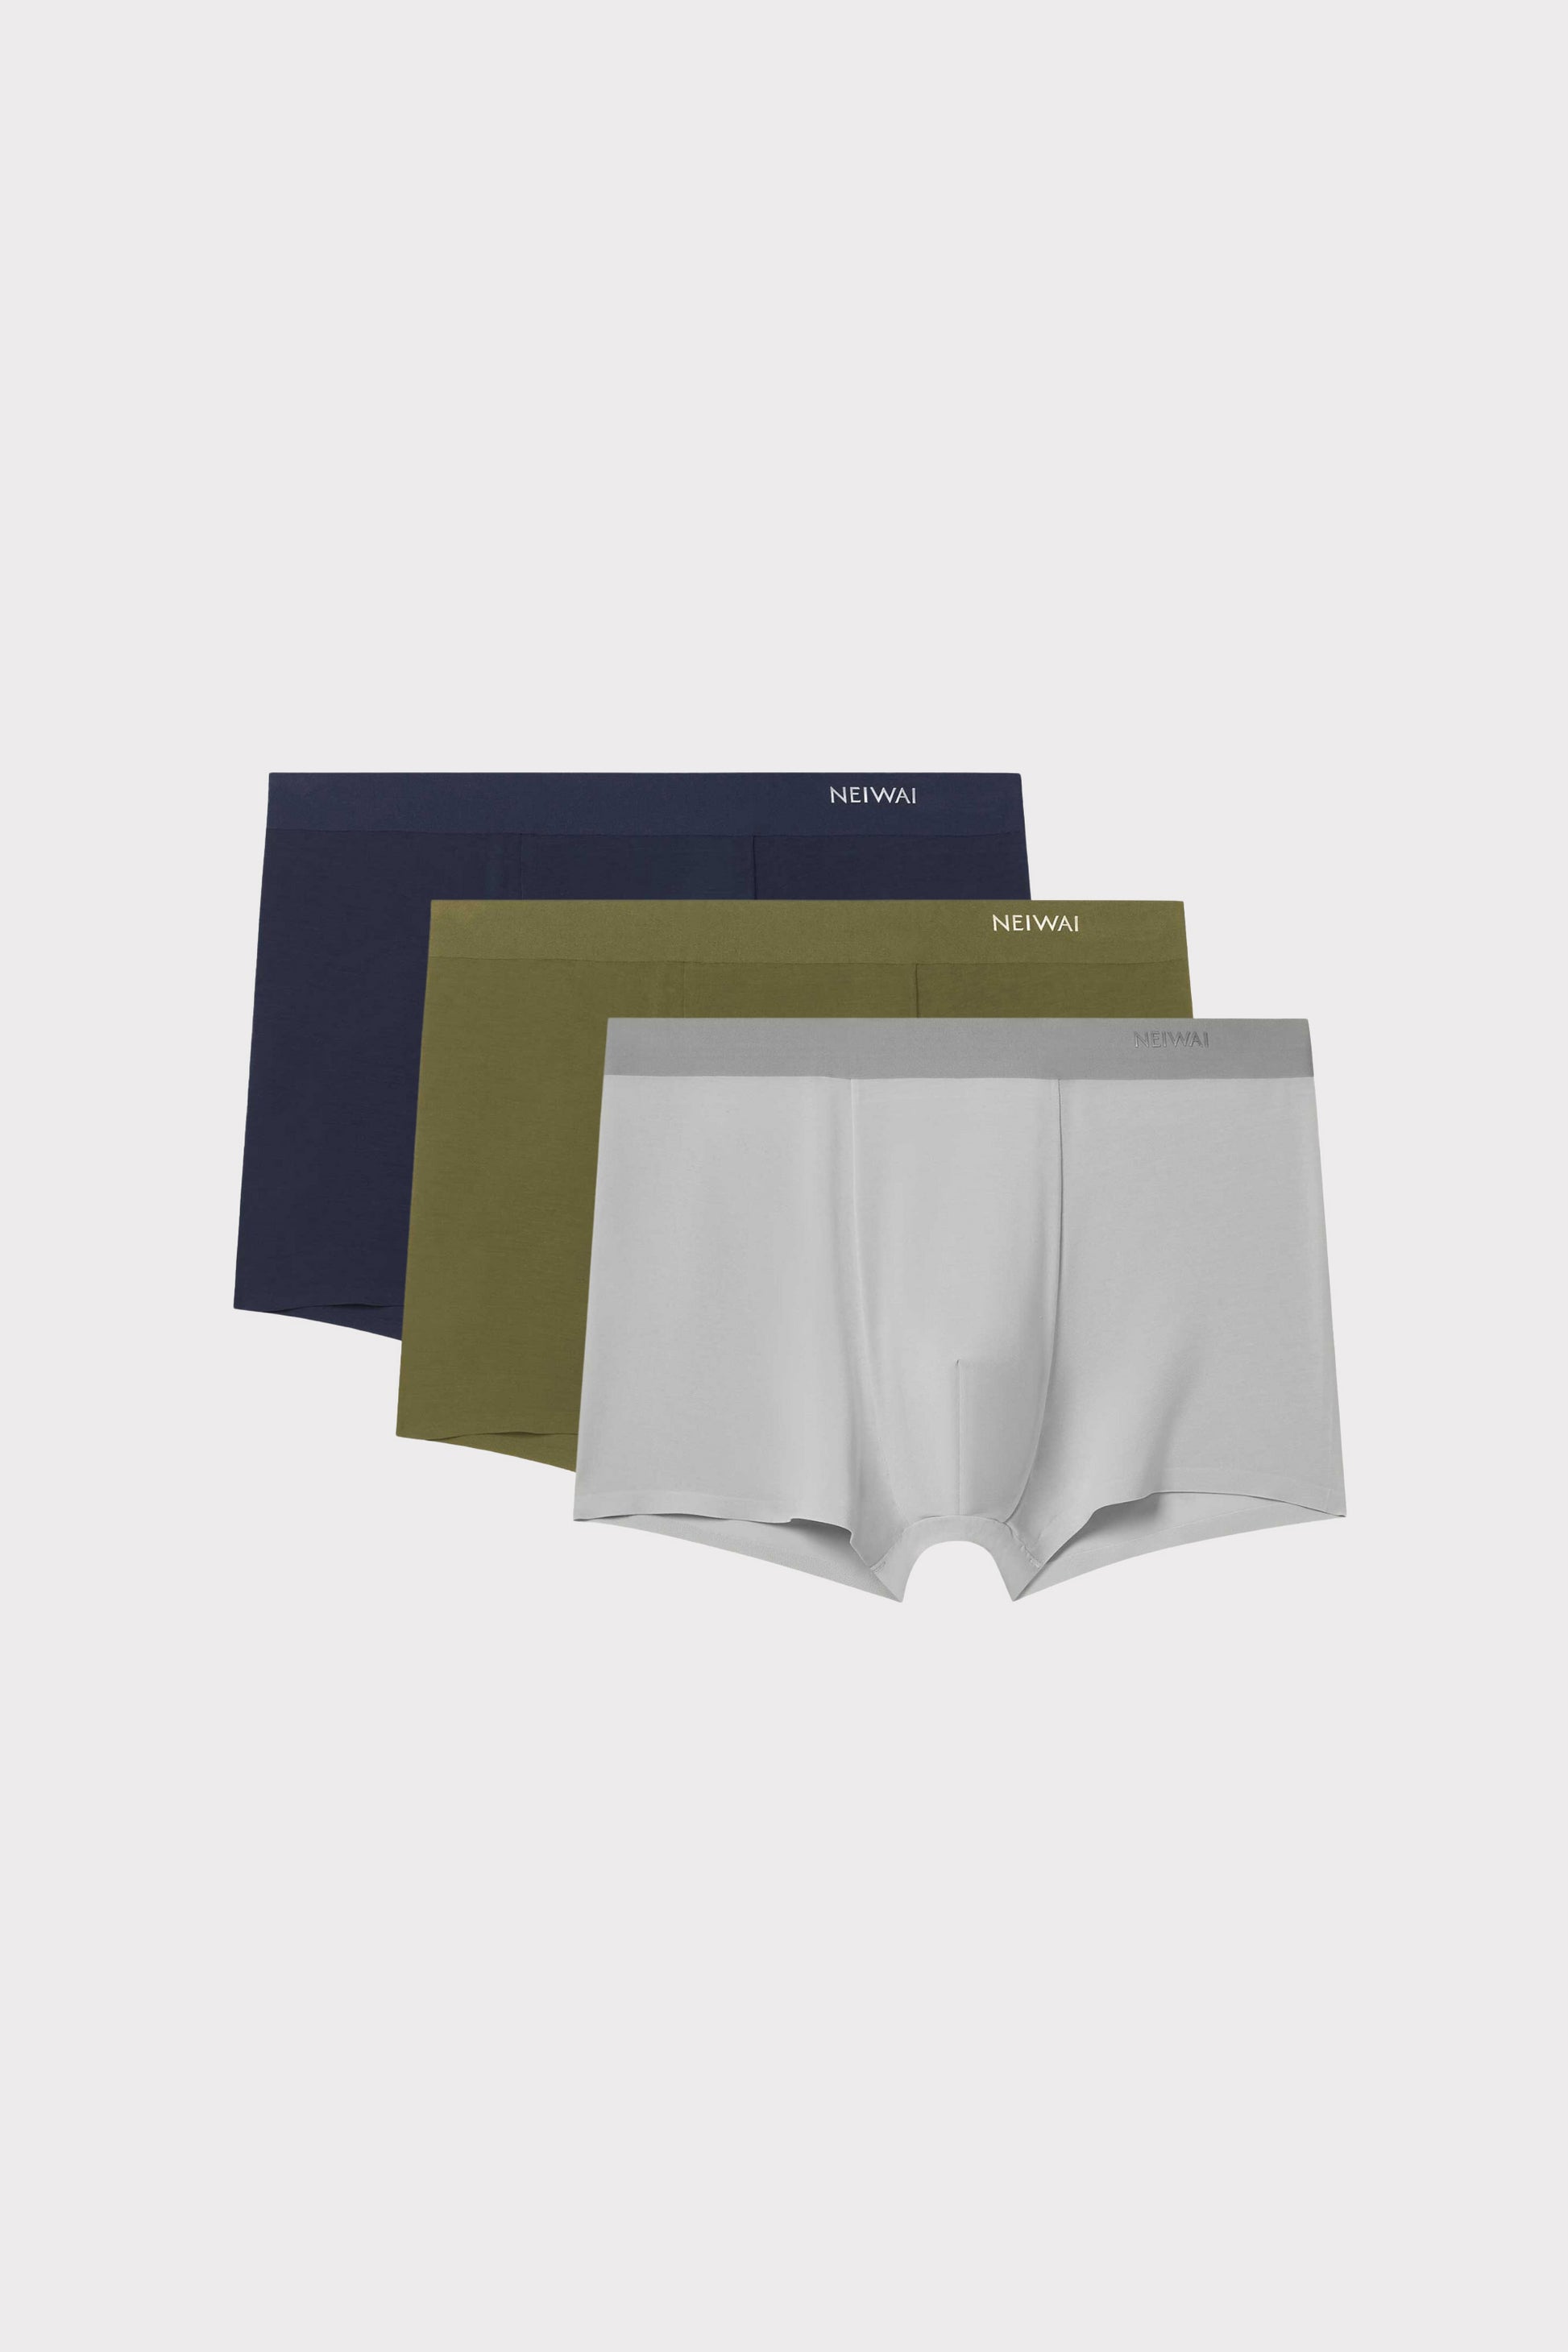 three briefs in navy, green, and grey